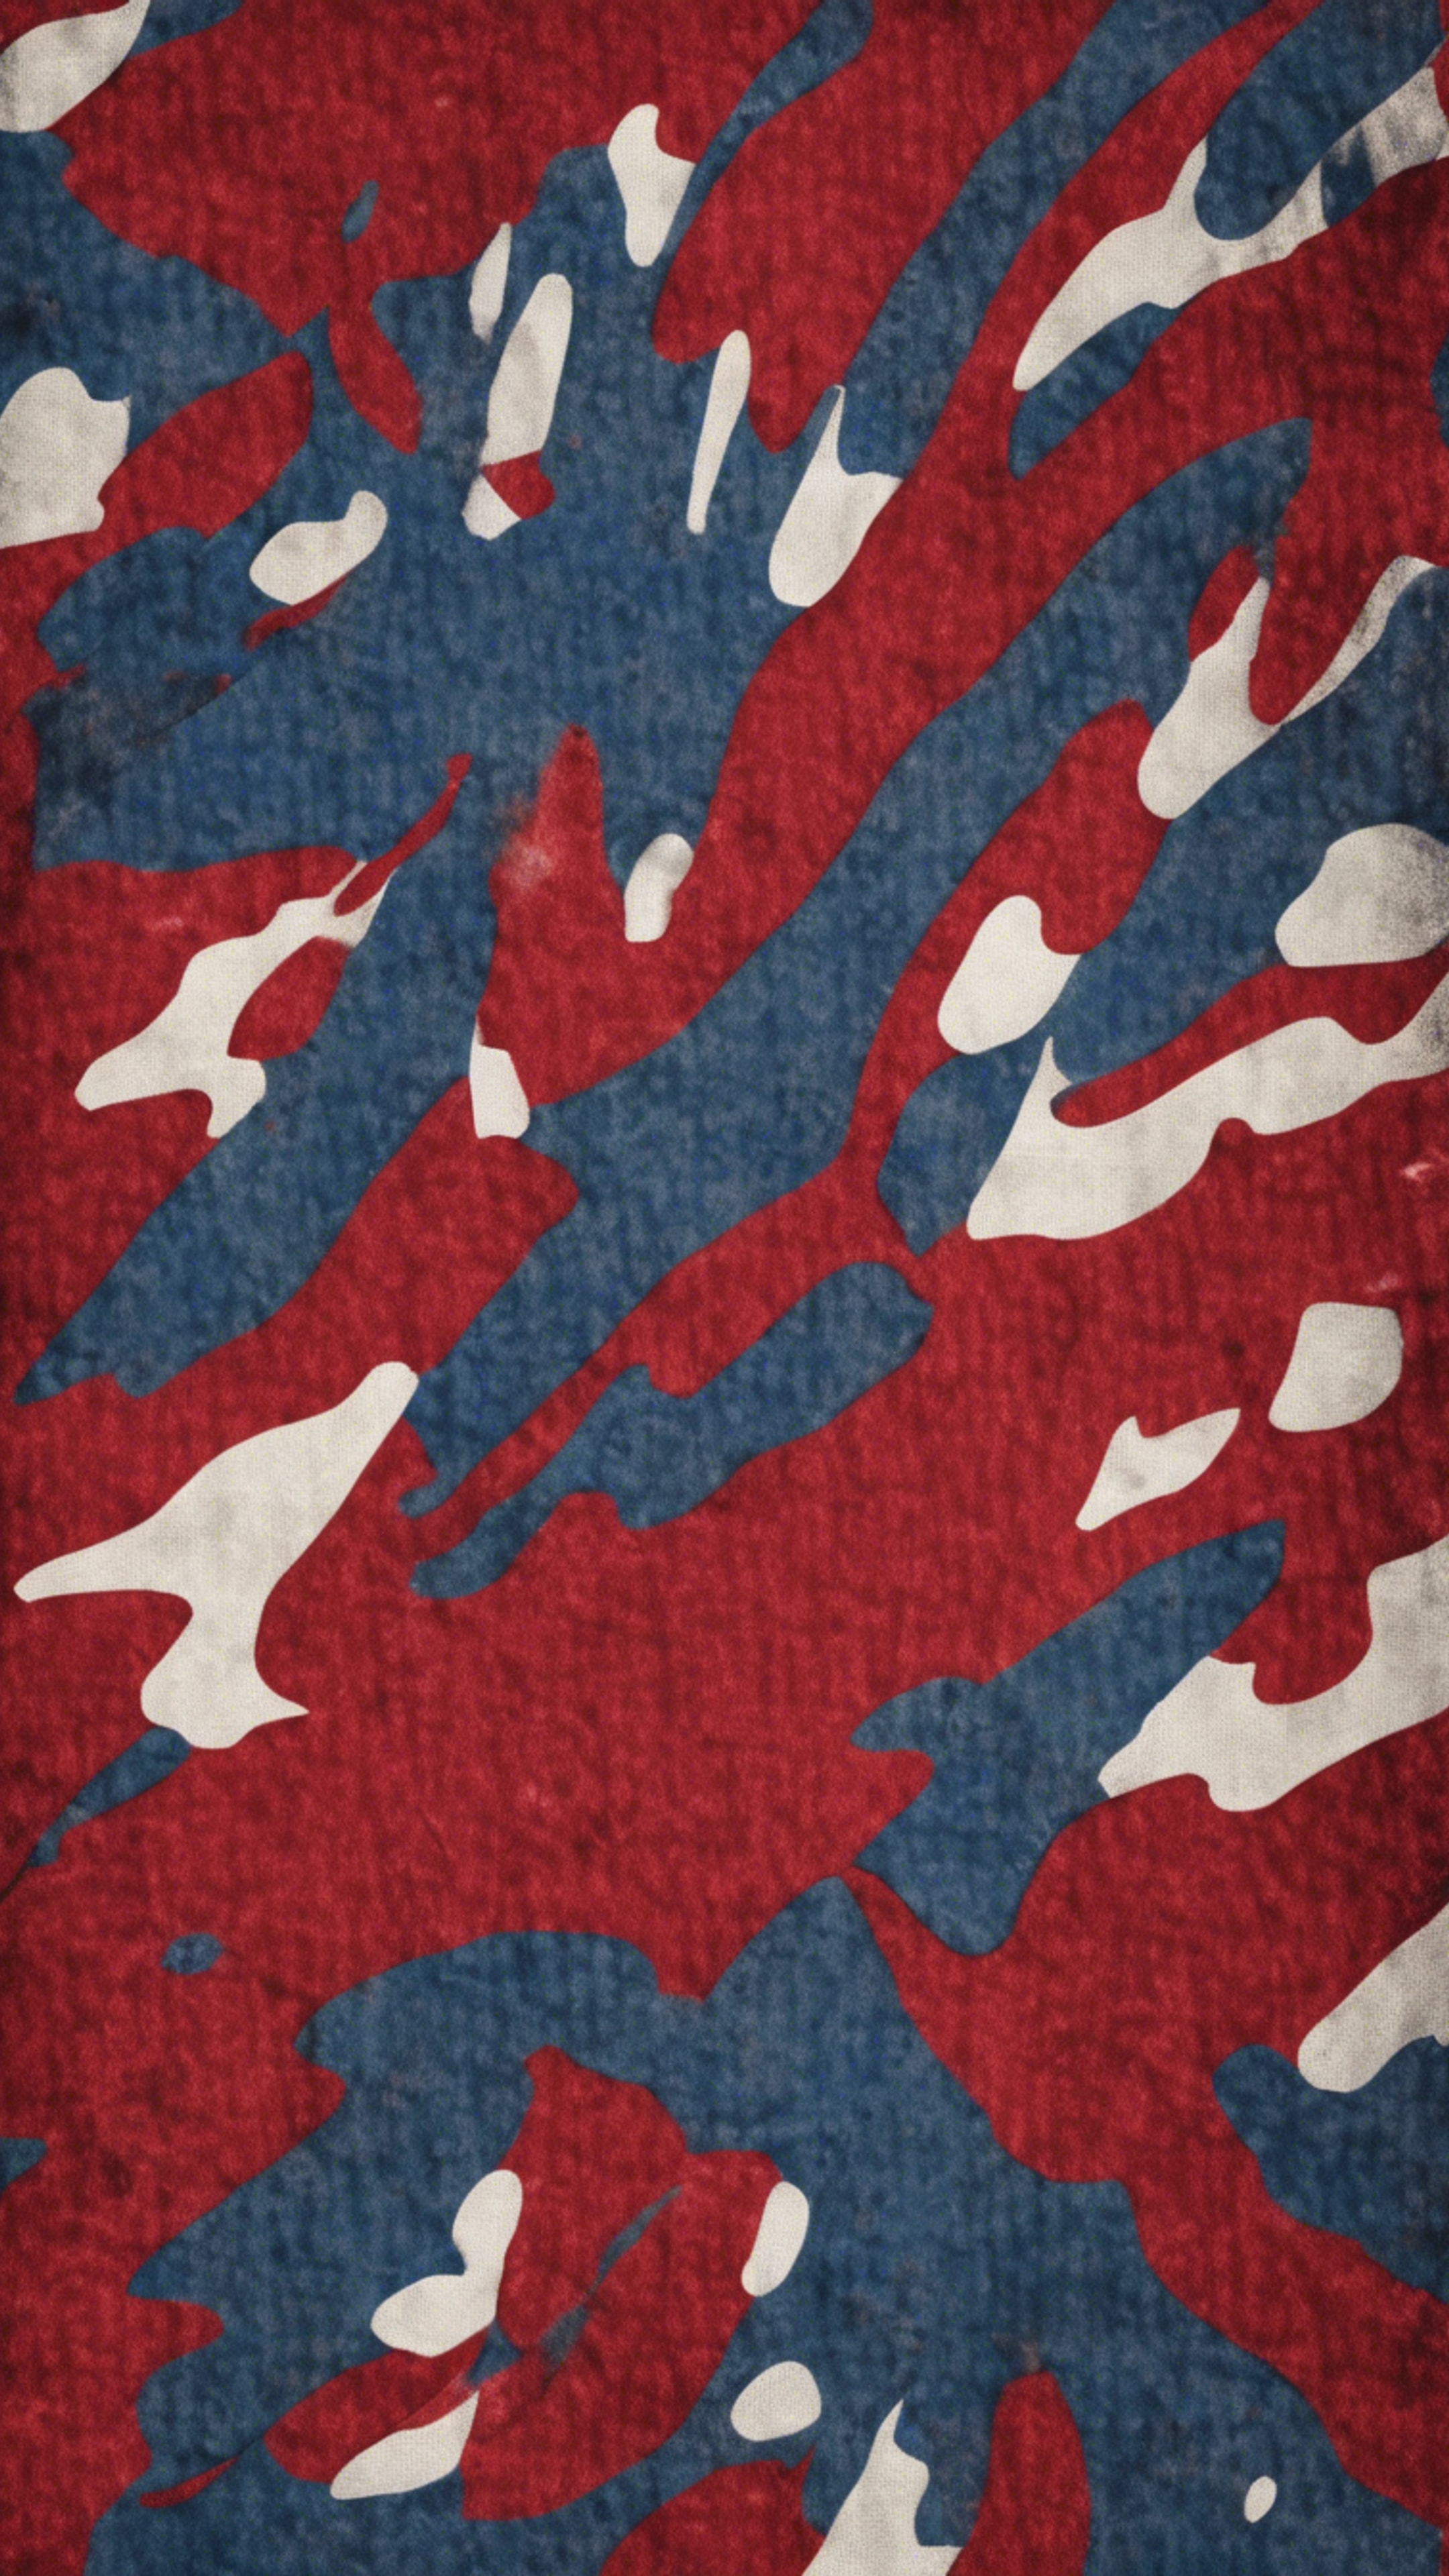 Red and blue camouflage pattern used in navy uniforms. ورق الجدران[01ccfb252ca748fab57f]